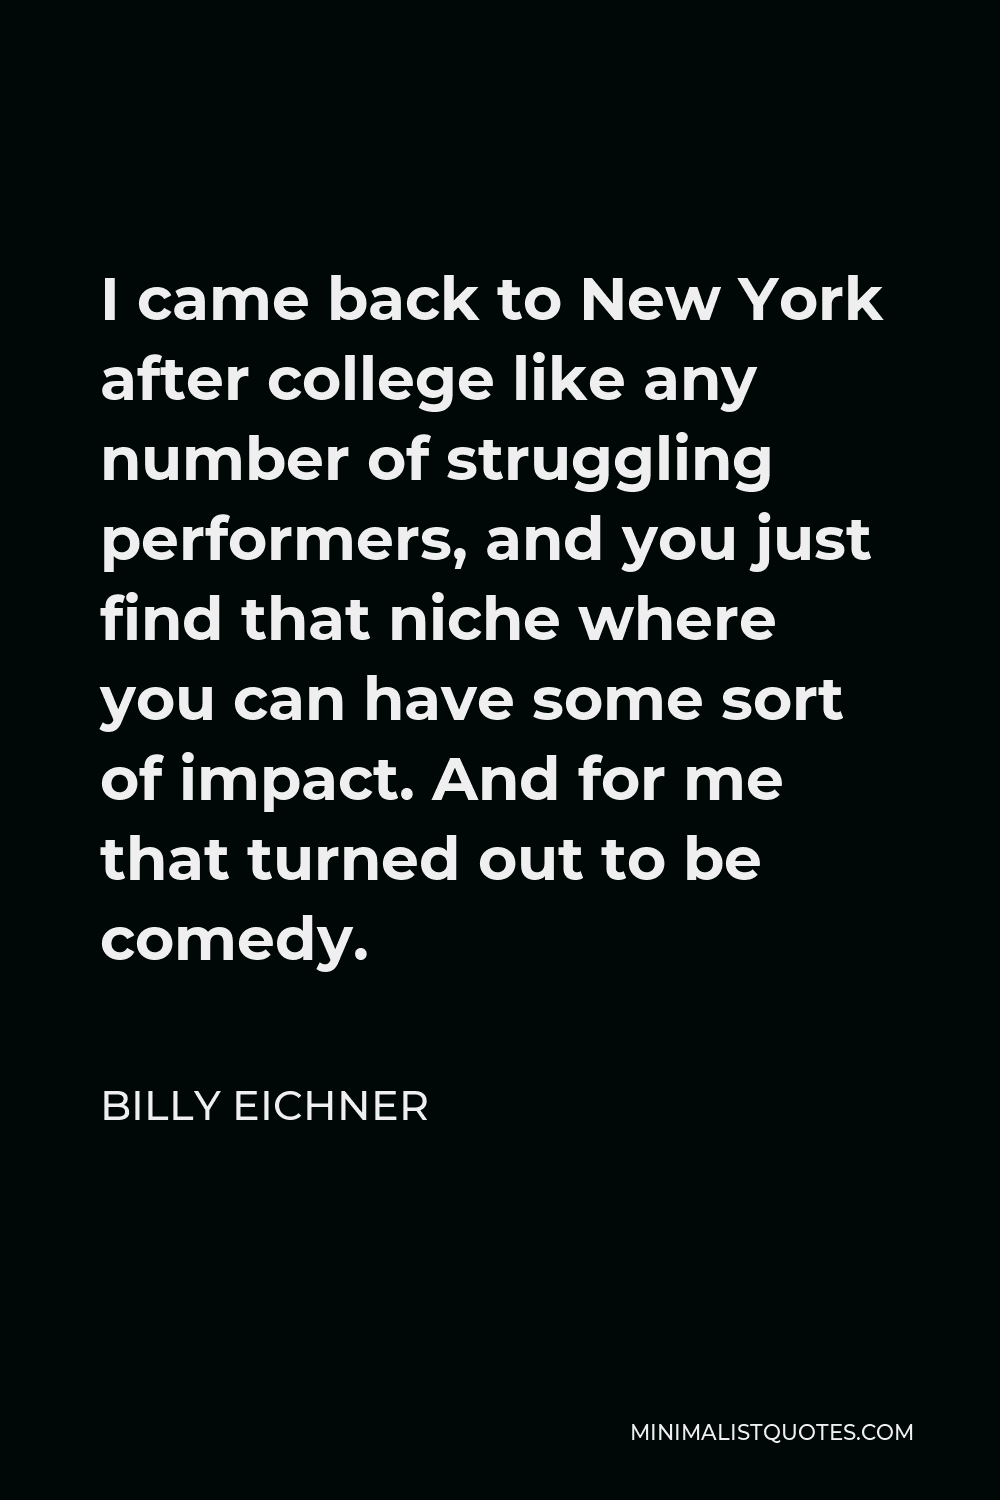 Billy Eichner Quote - I came back to New York after college like any number of struggling performers, and you just find that niche where you can have some sort of impact. And for me that turned out to be comedy.